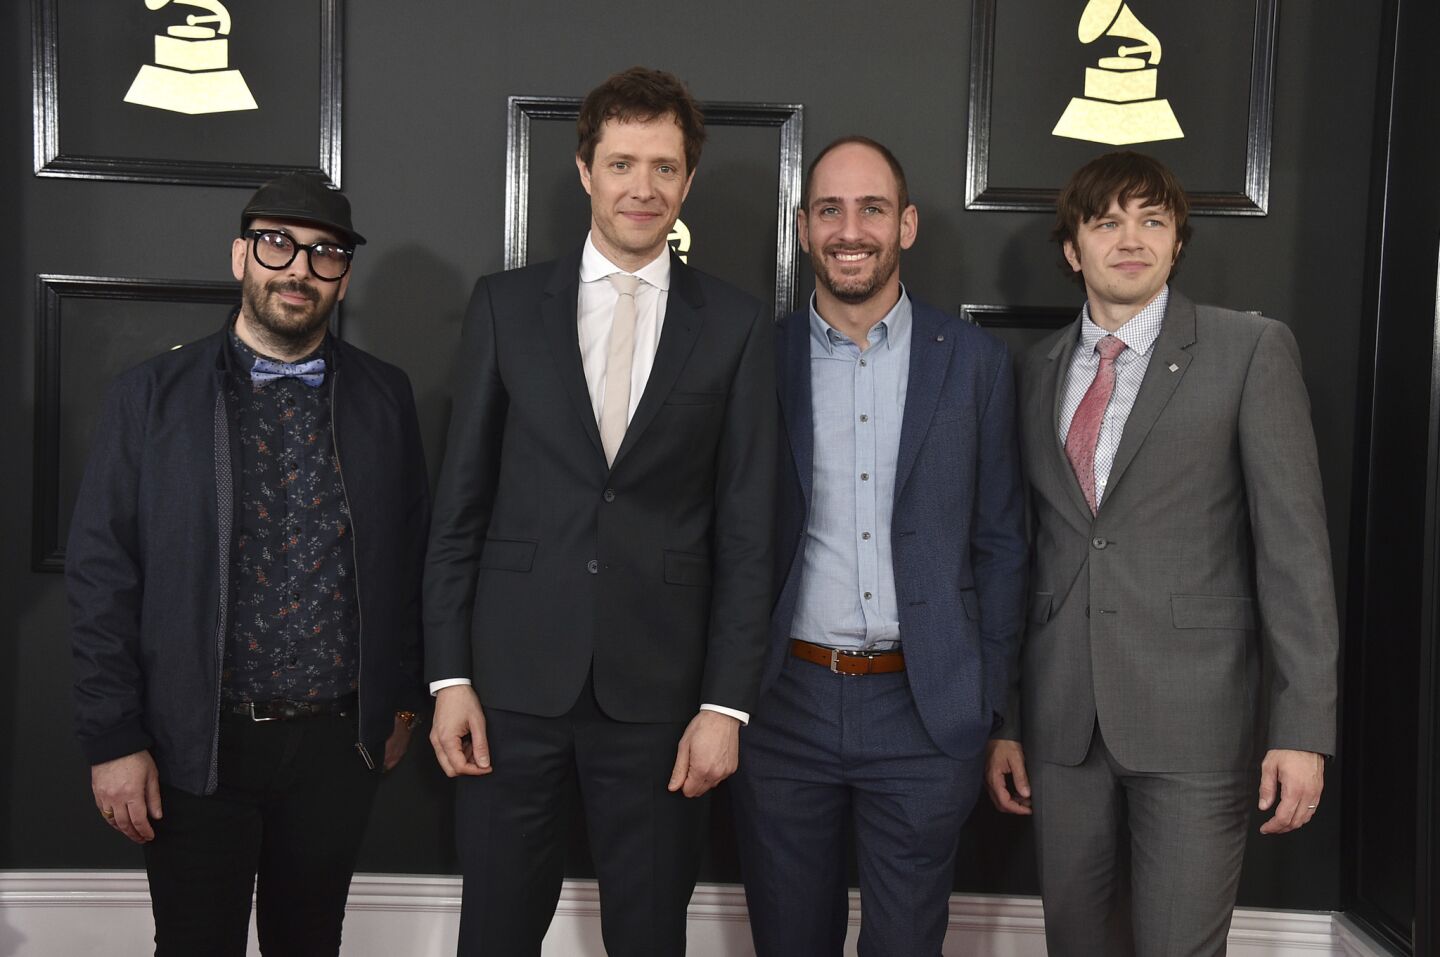 From left, Tim Nordwind, Damian Kulash, Dan Konopka, and Andy Ross of OK Go arrive at the 59th Grammy Awards.